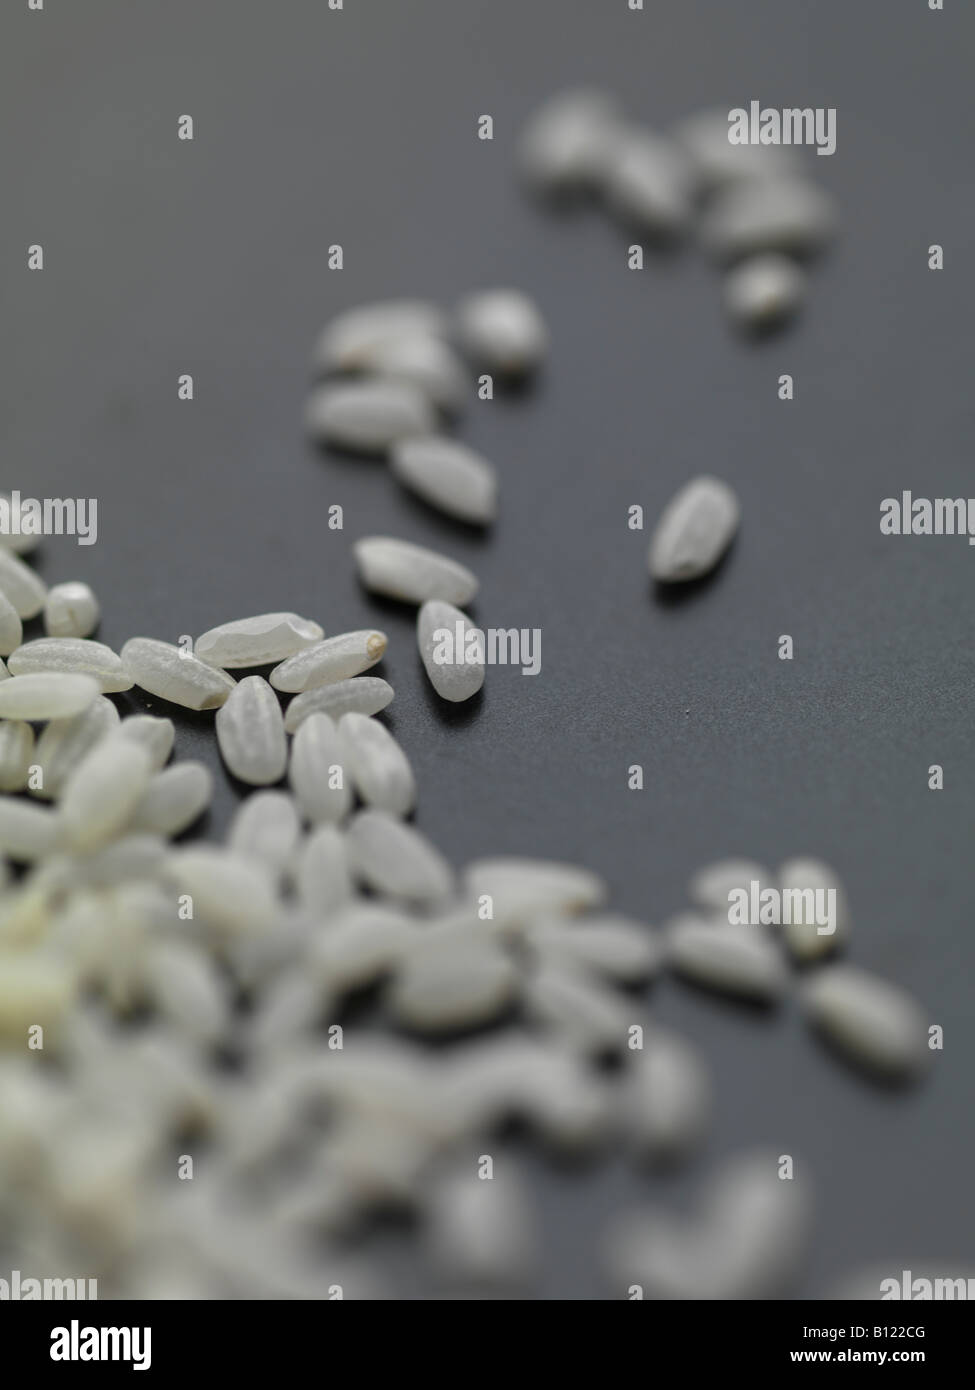 grain rice close-up strew scatter out of focus Stock Photo